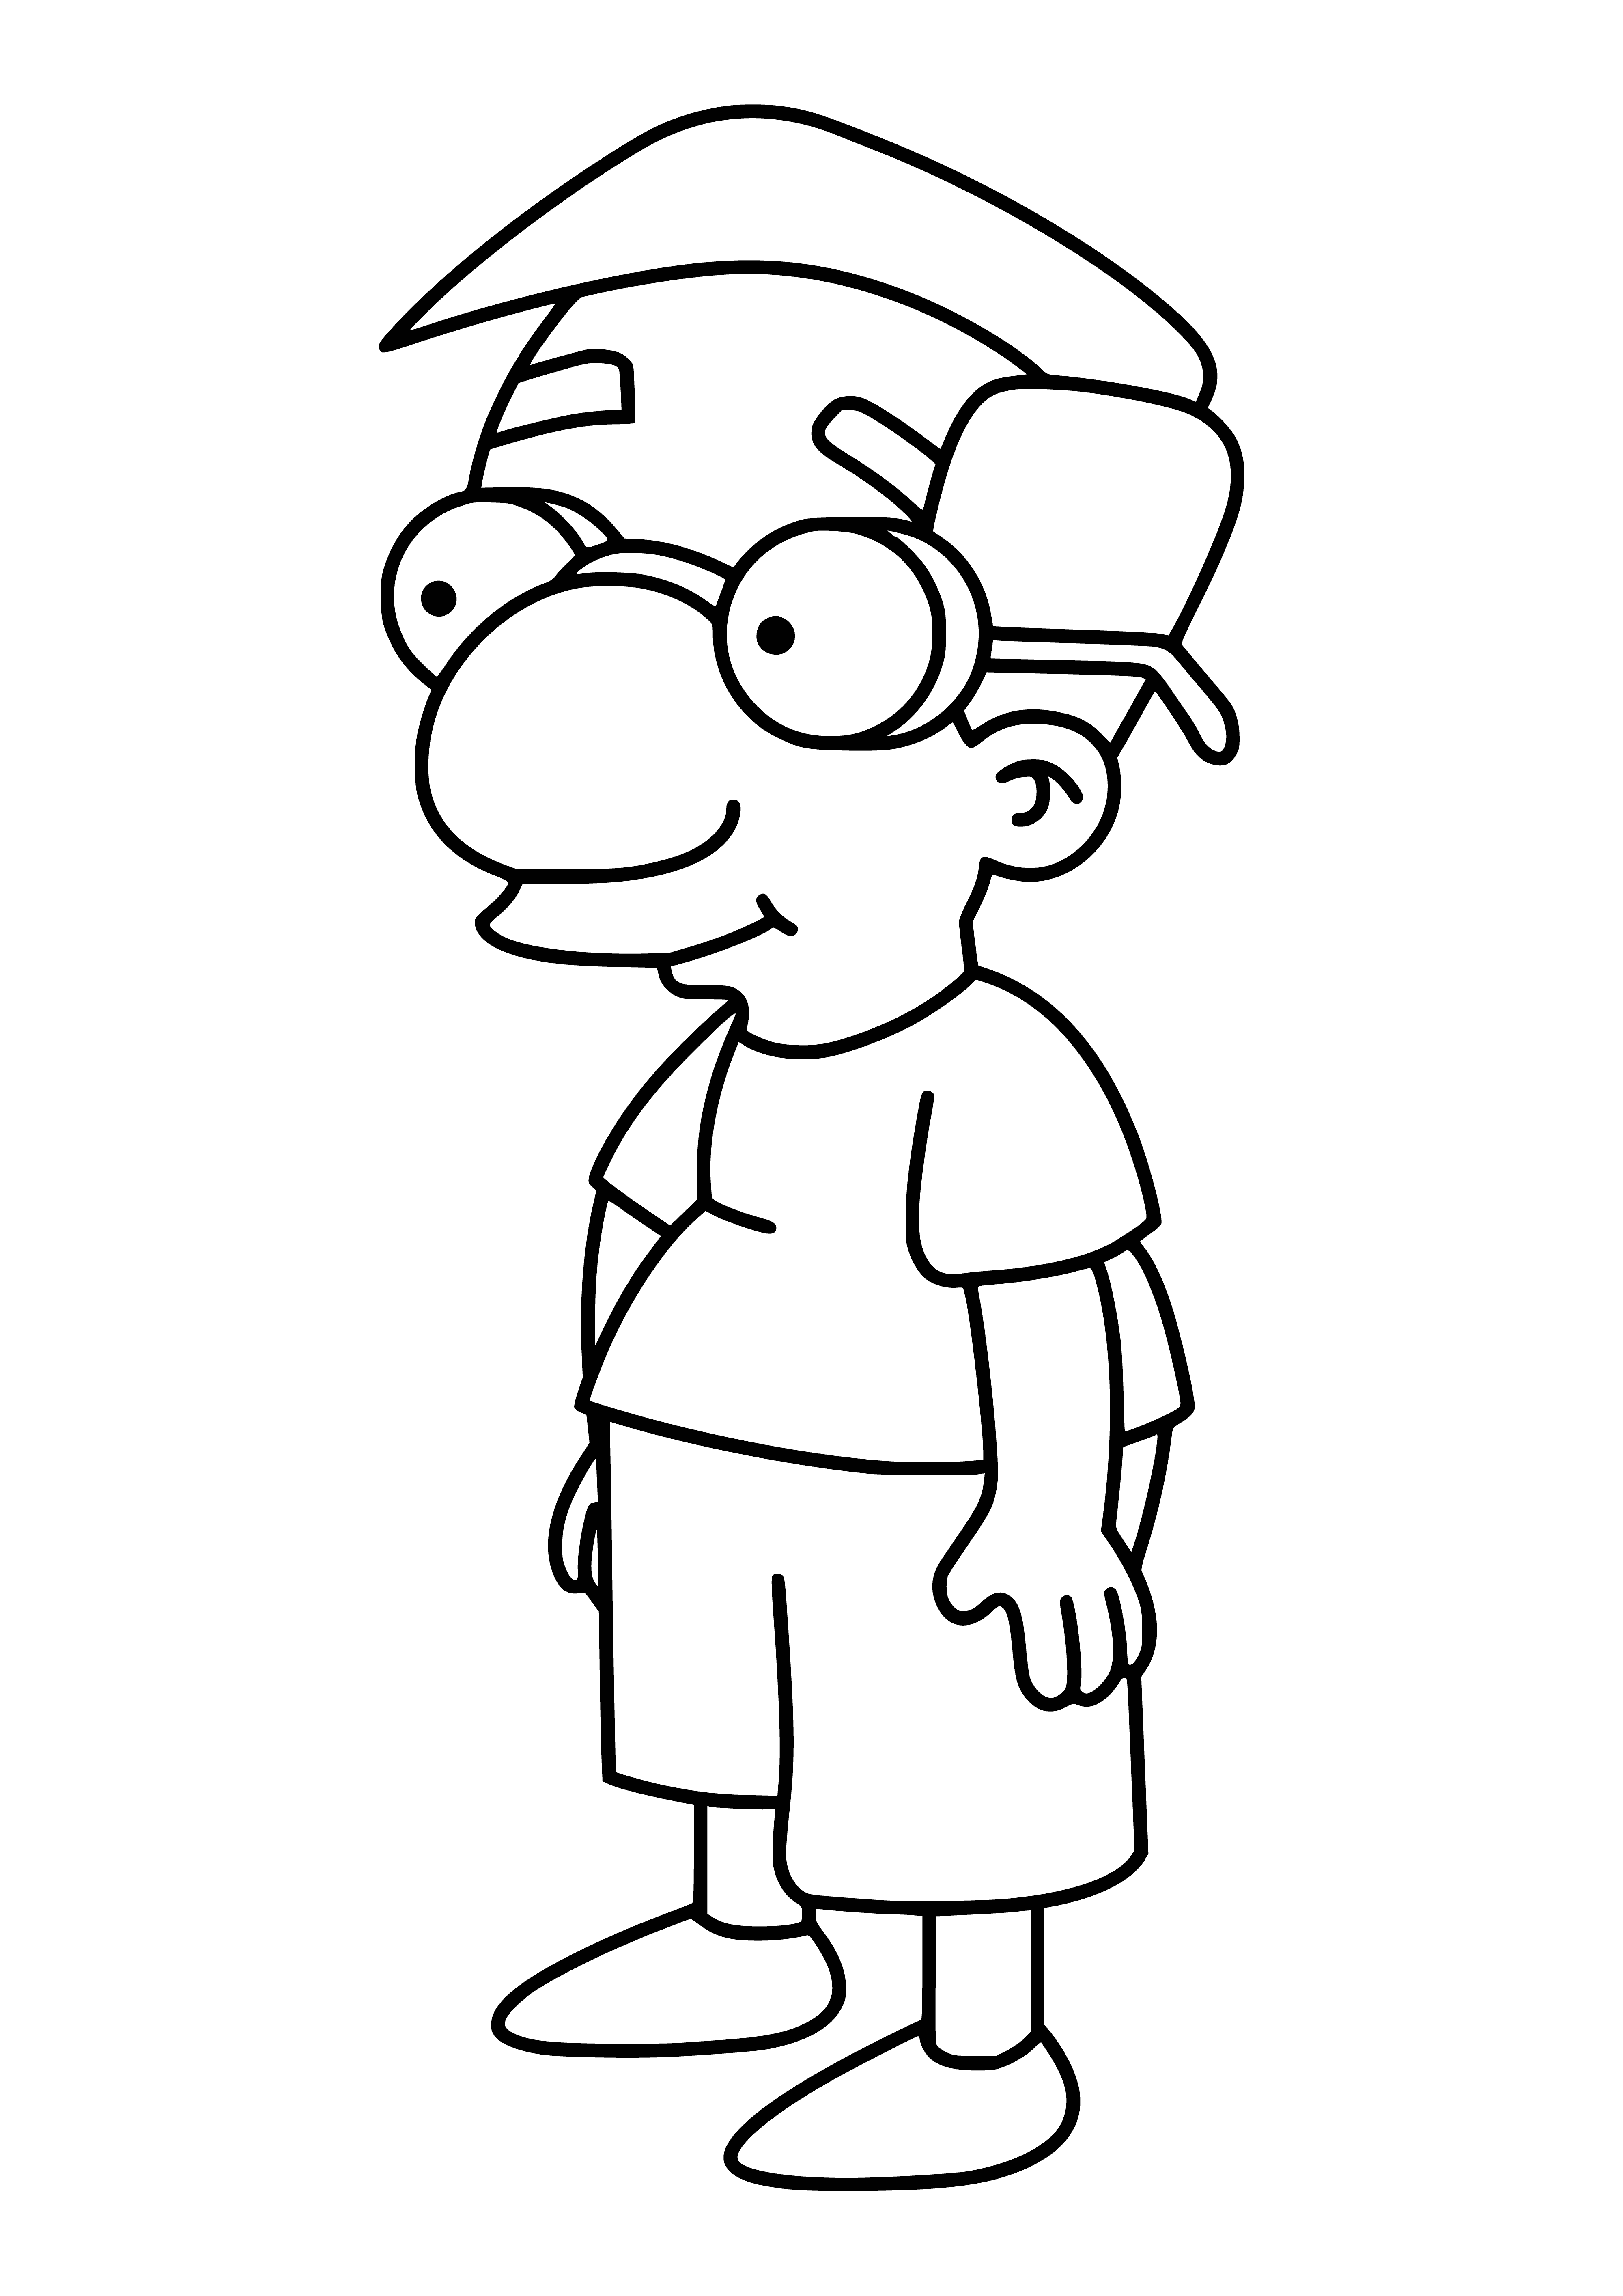 coloring page: Millhouse's outfit: red shirt, yellow jacket, blue pants & shoes; blue hair, big teeth.